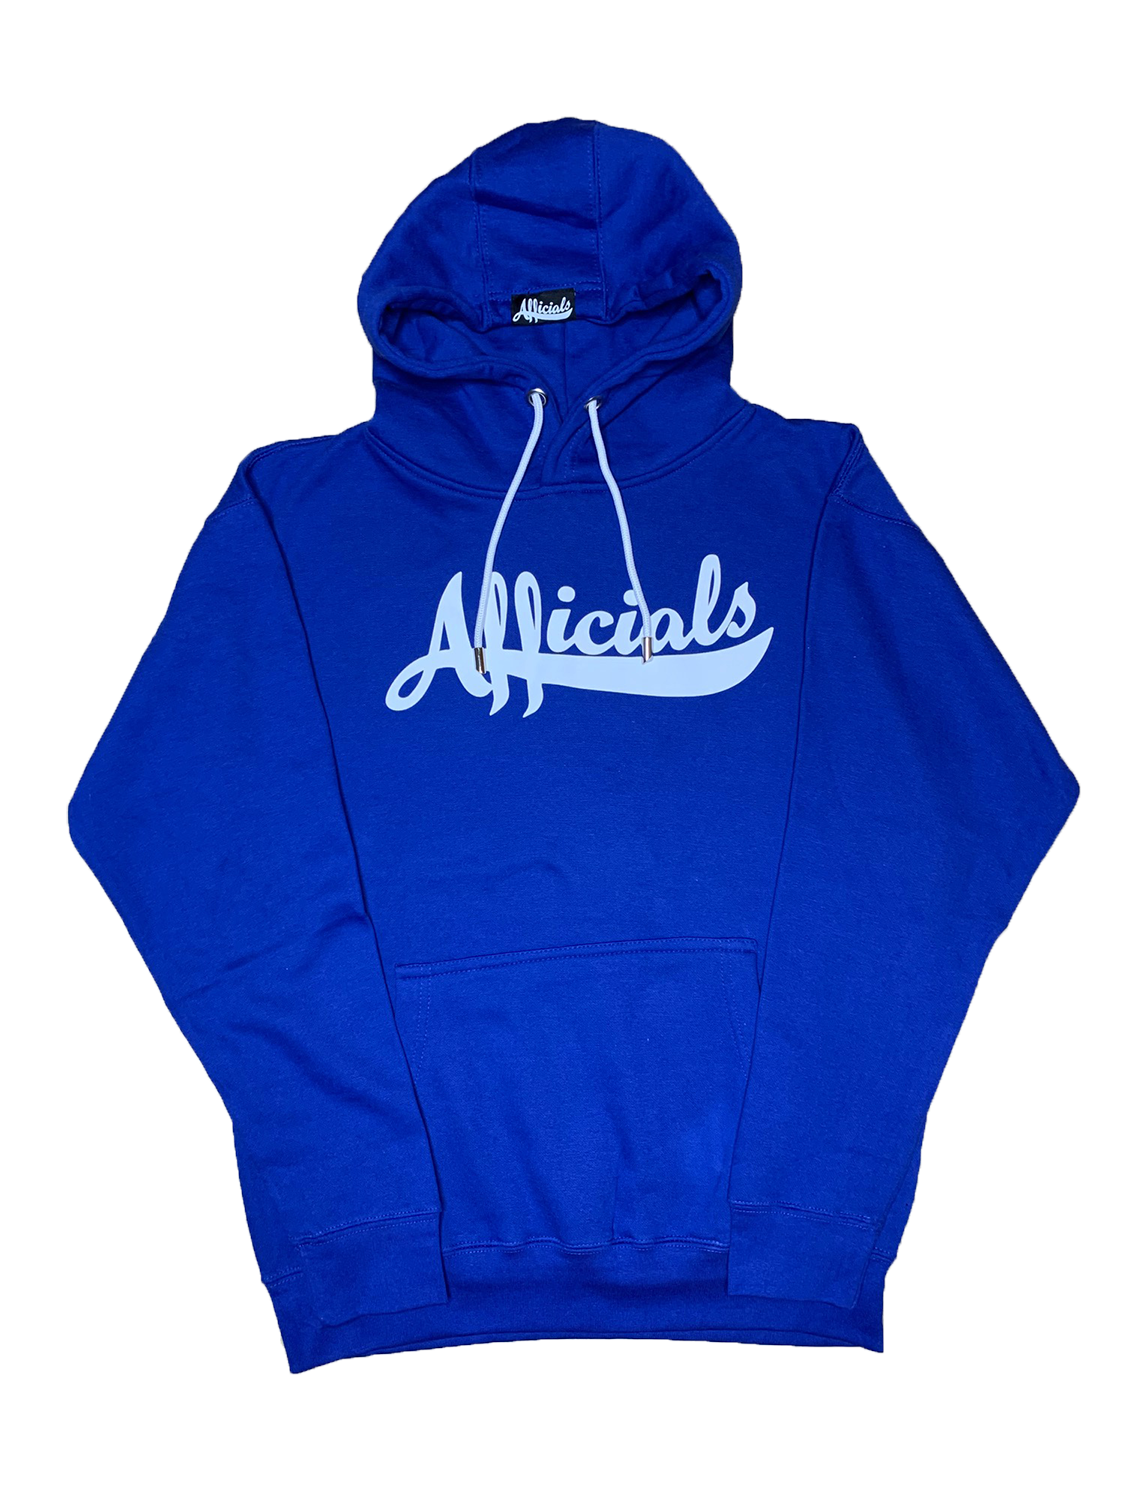 Afficials Signature Hoodie ROYAL BLUE/WHITE